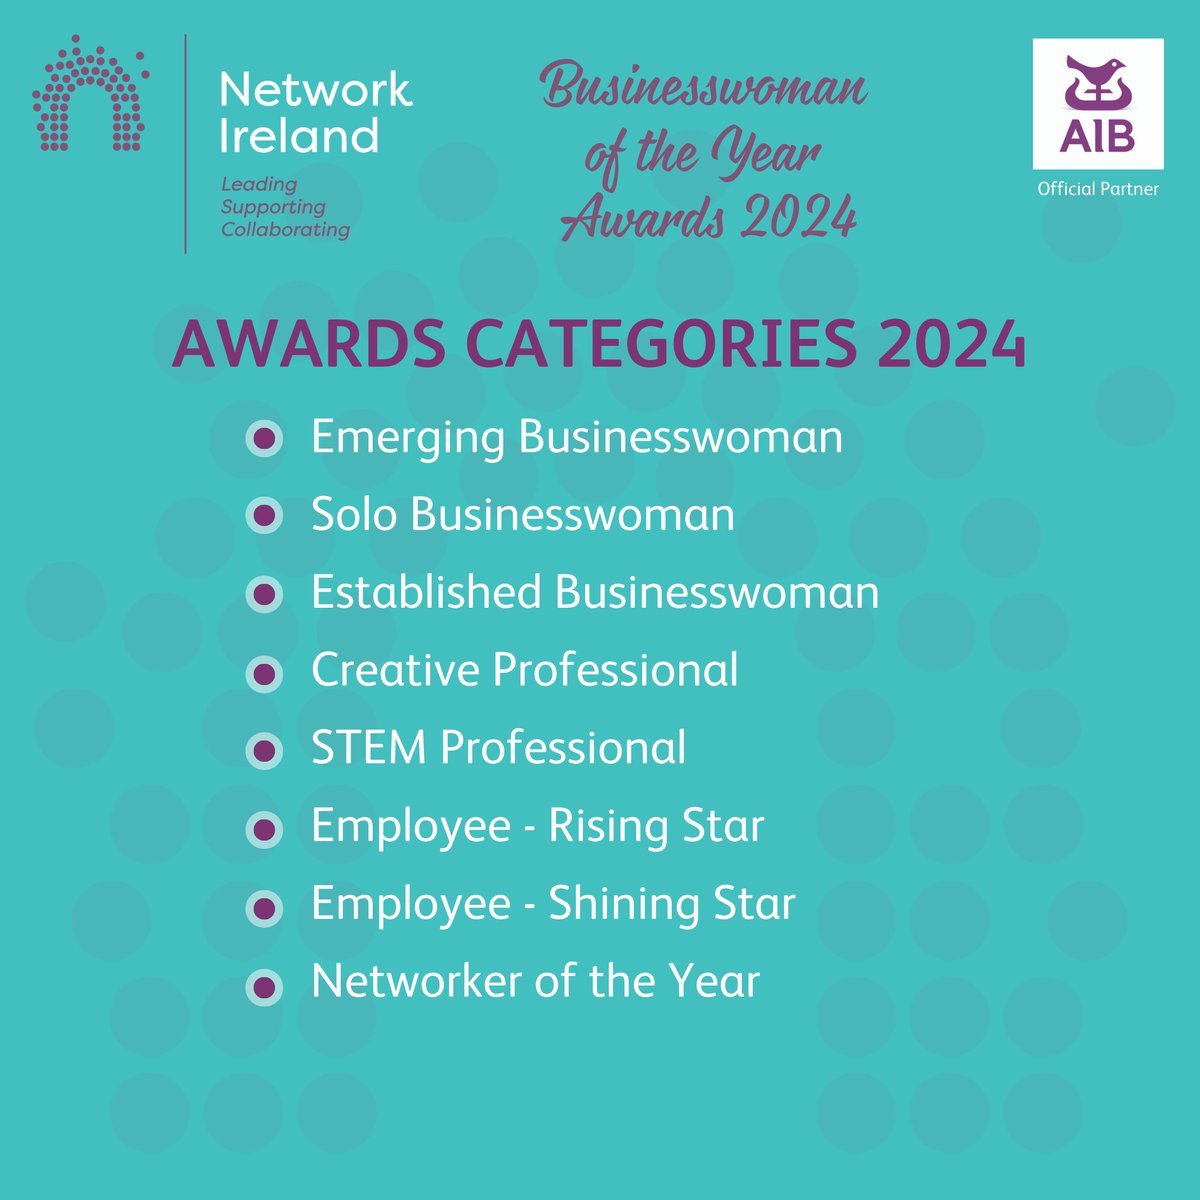 Entering awards is a great way of taking stock of achievements & getting free publicity! 
Network Ireland Businesswoman of the Year awards are now open with 8 categories to choose from. Closing date is 6pm Friday 19th April. Apply here bit.ly/3v8Ss6Q #NIWC24